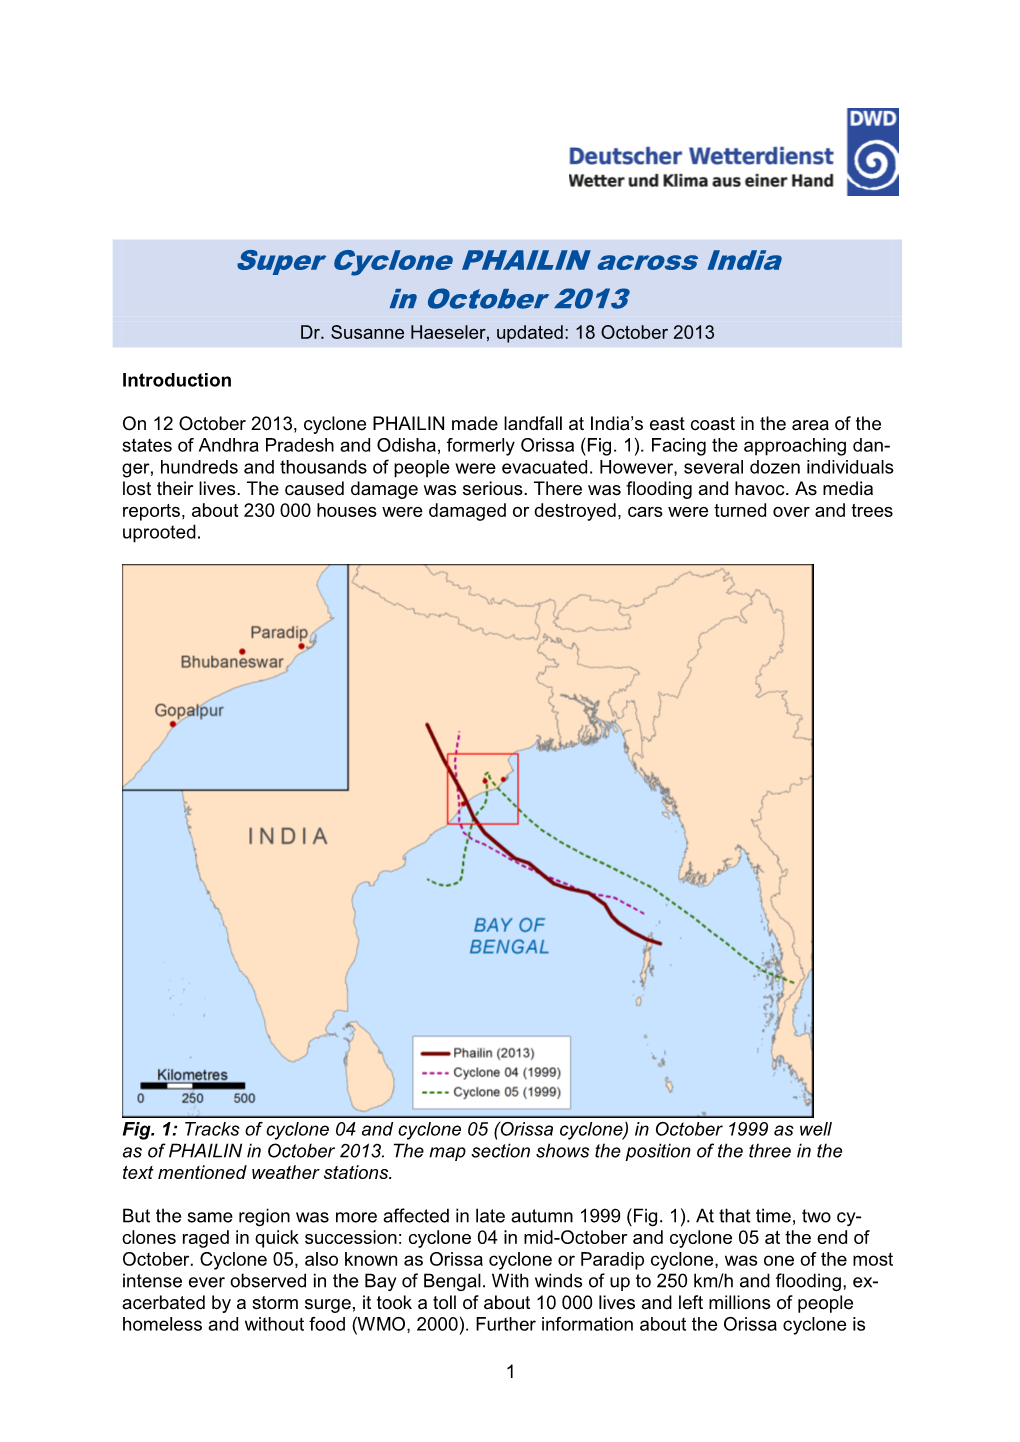 Super Cyclone PHAILIN Across India in October 2013 Dr